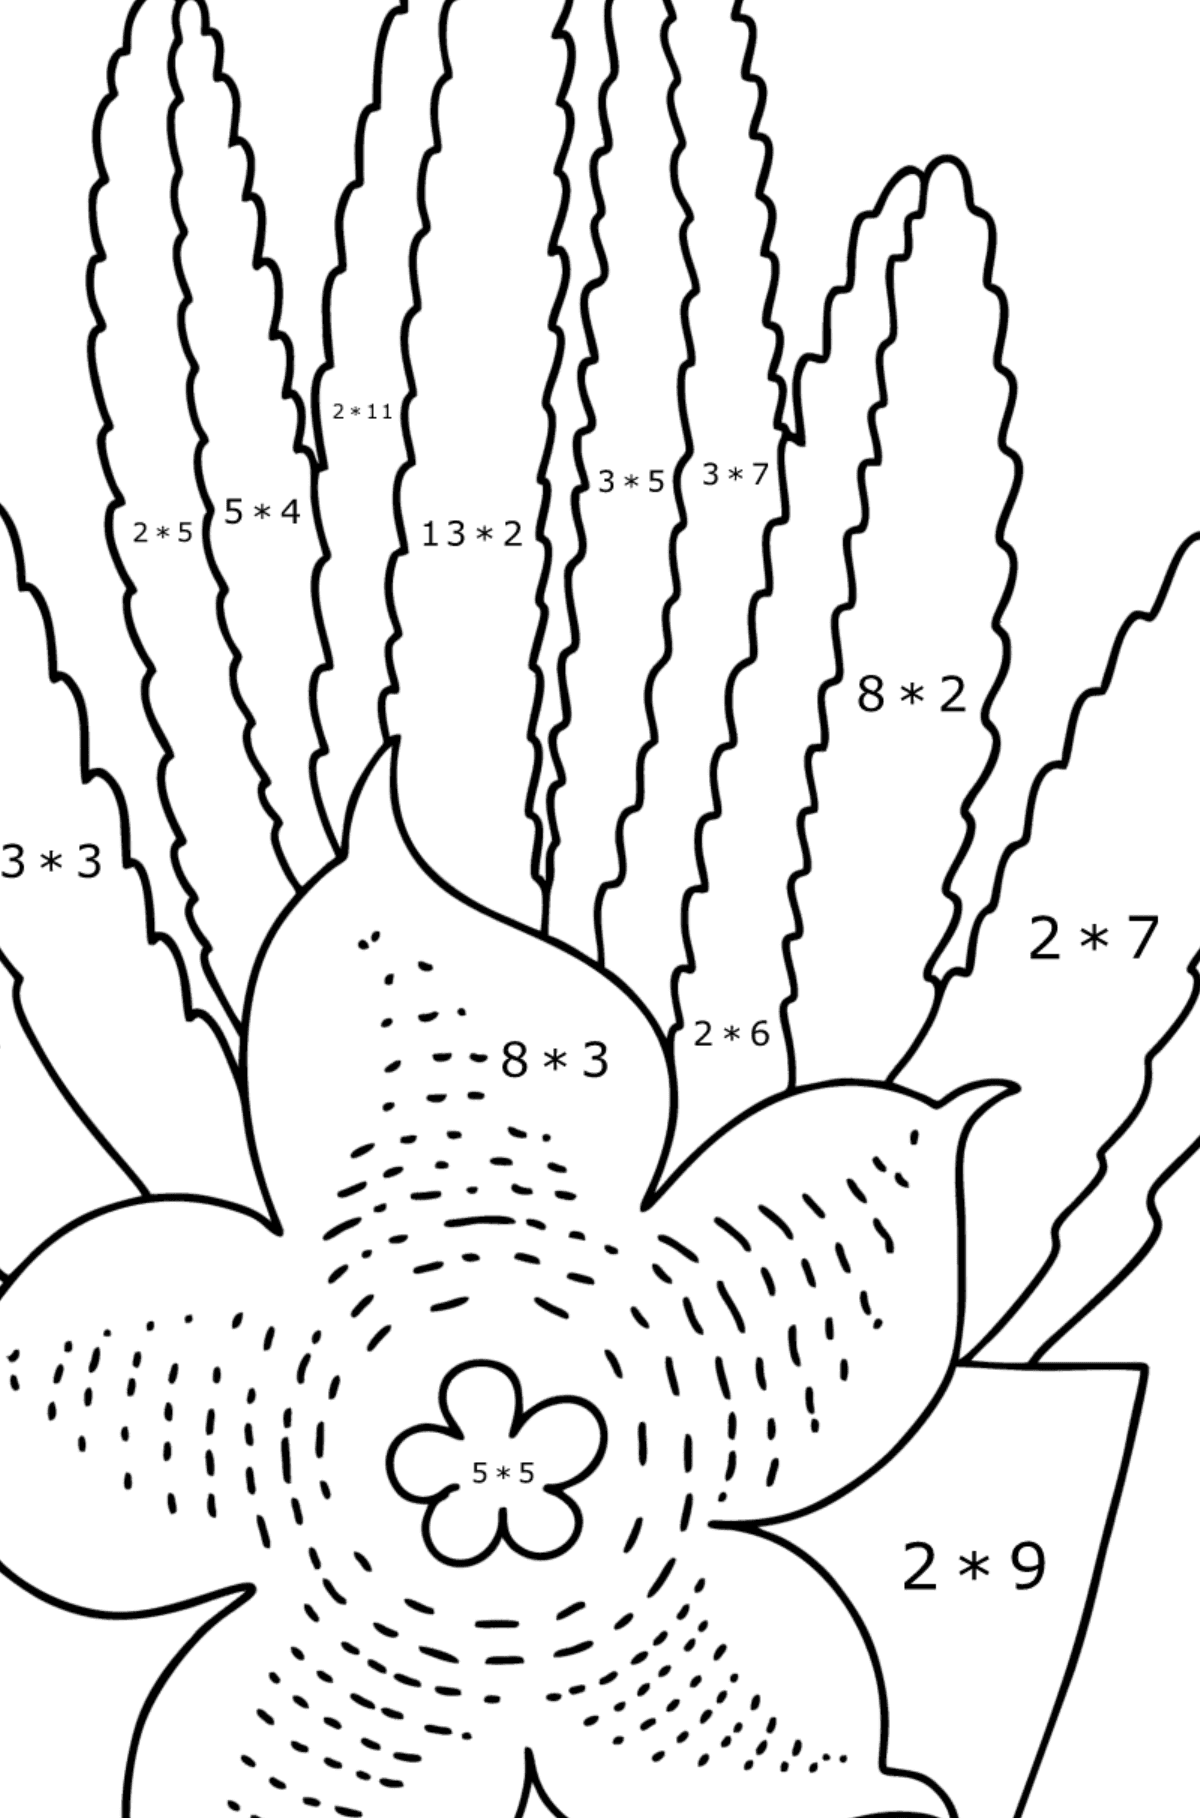 Stapelia Cactus coloring page - Math Coloring - Multiplication for Kids